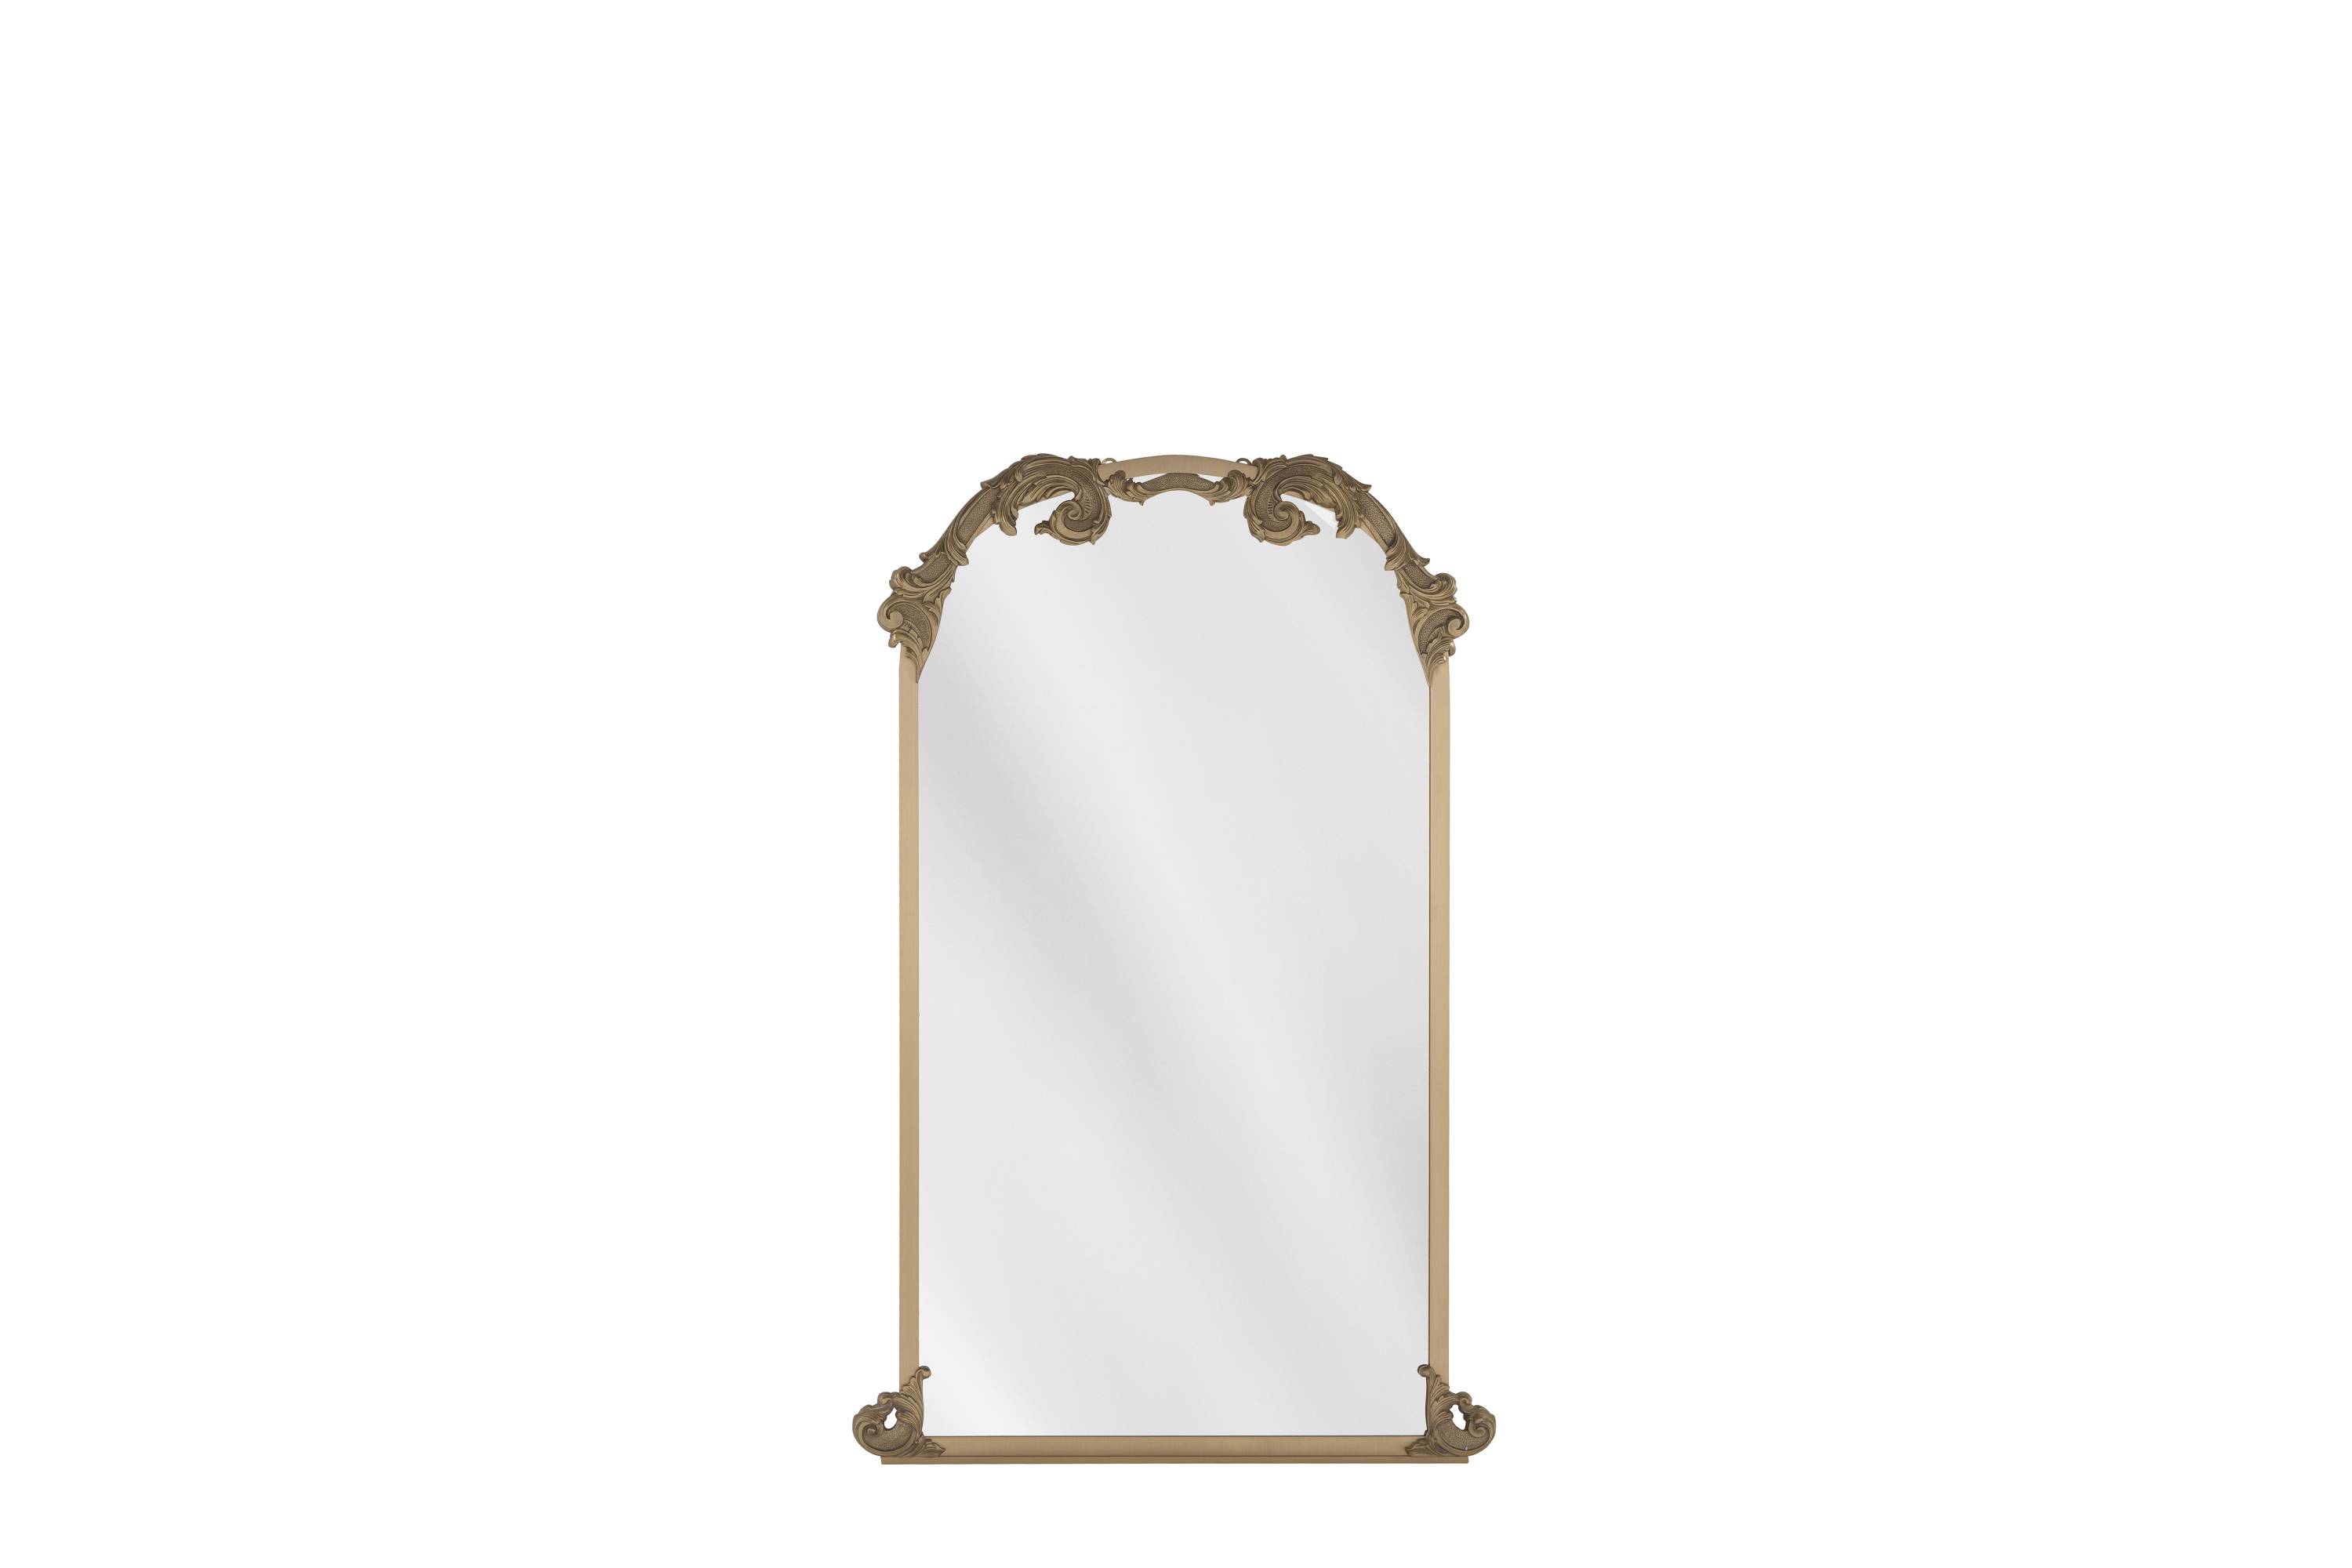 MADELEINE mirror – Transform your space with sophisticated Made in Italy classic MIRRORS.